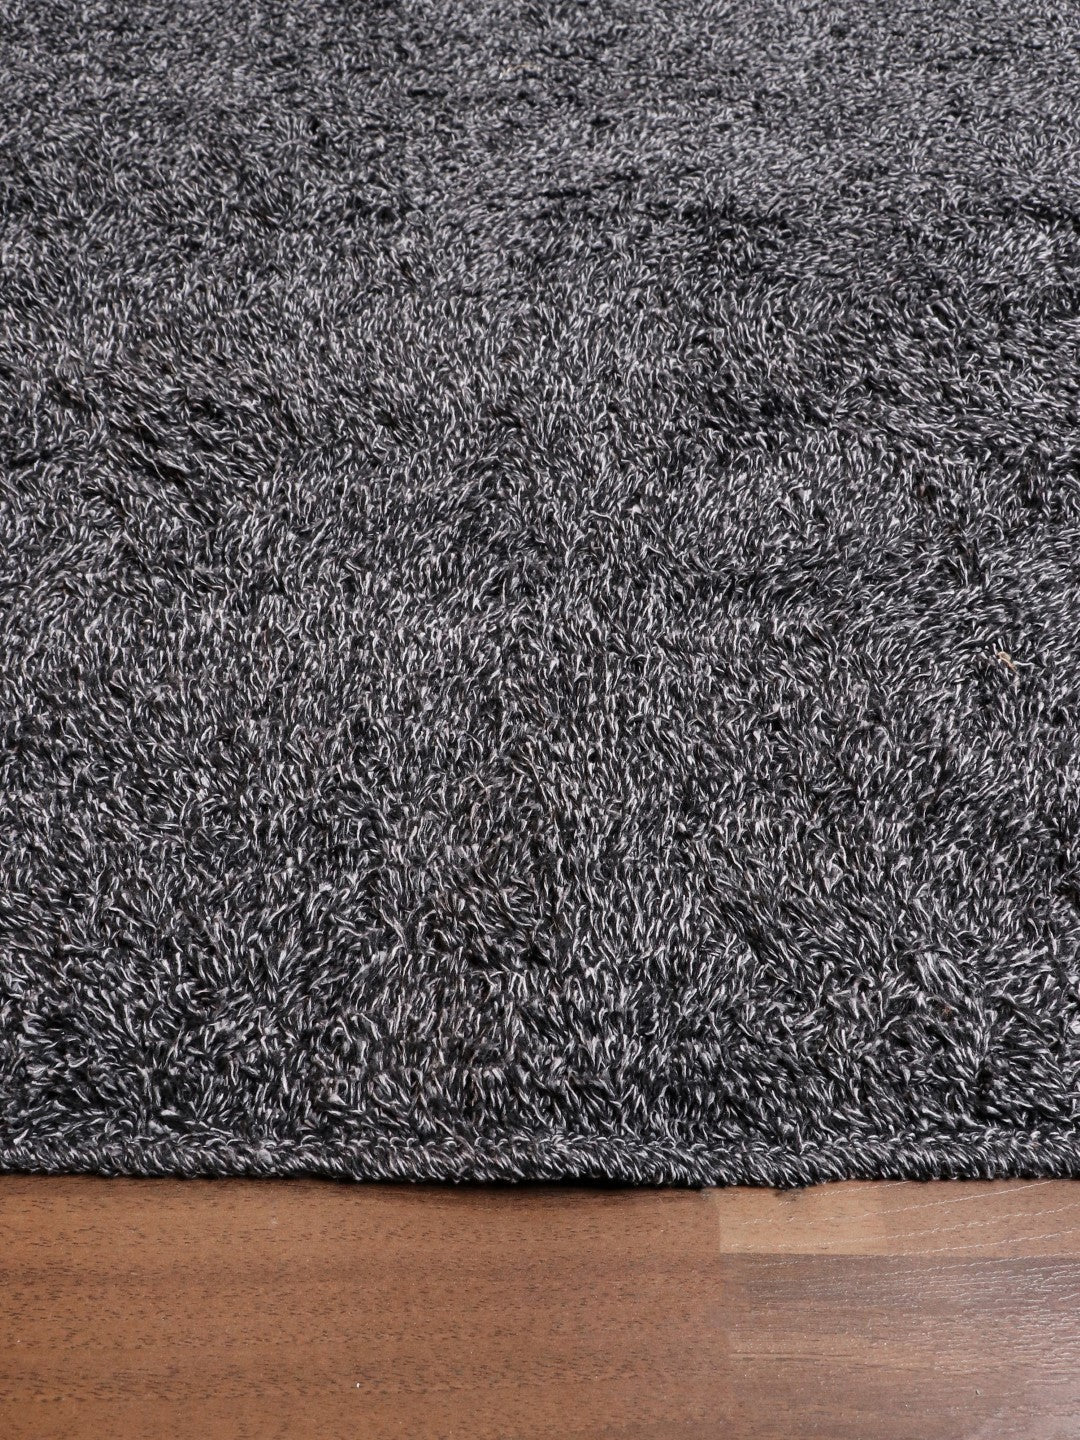 Black Fancy Cotton Shaggy Soft and Thick Runner with TPR Backing